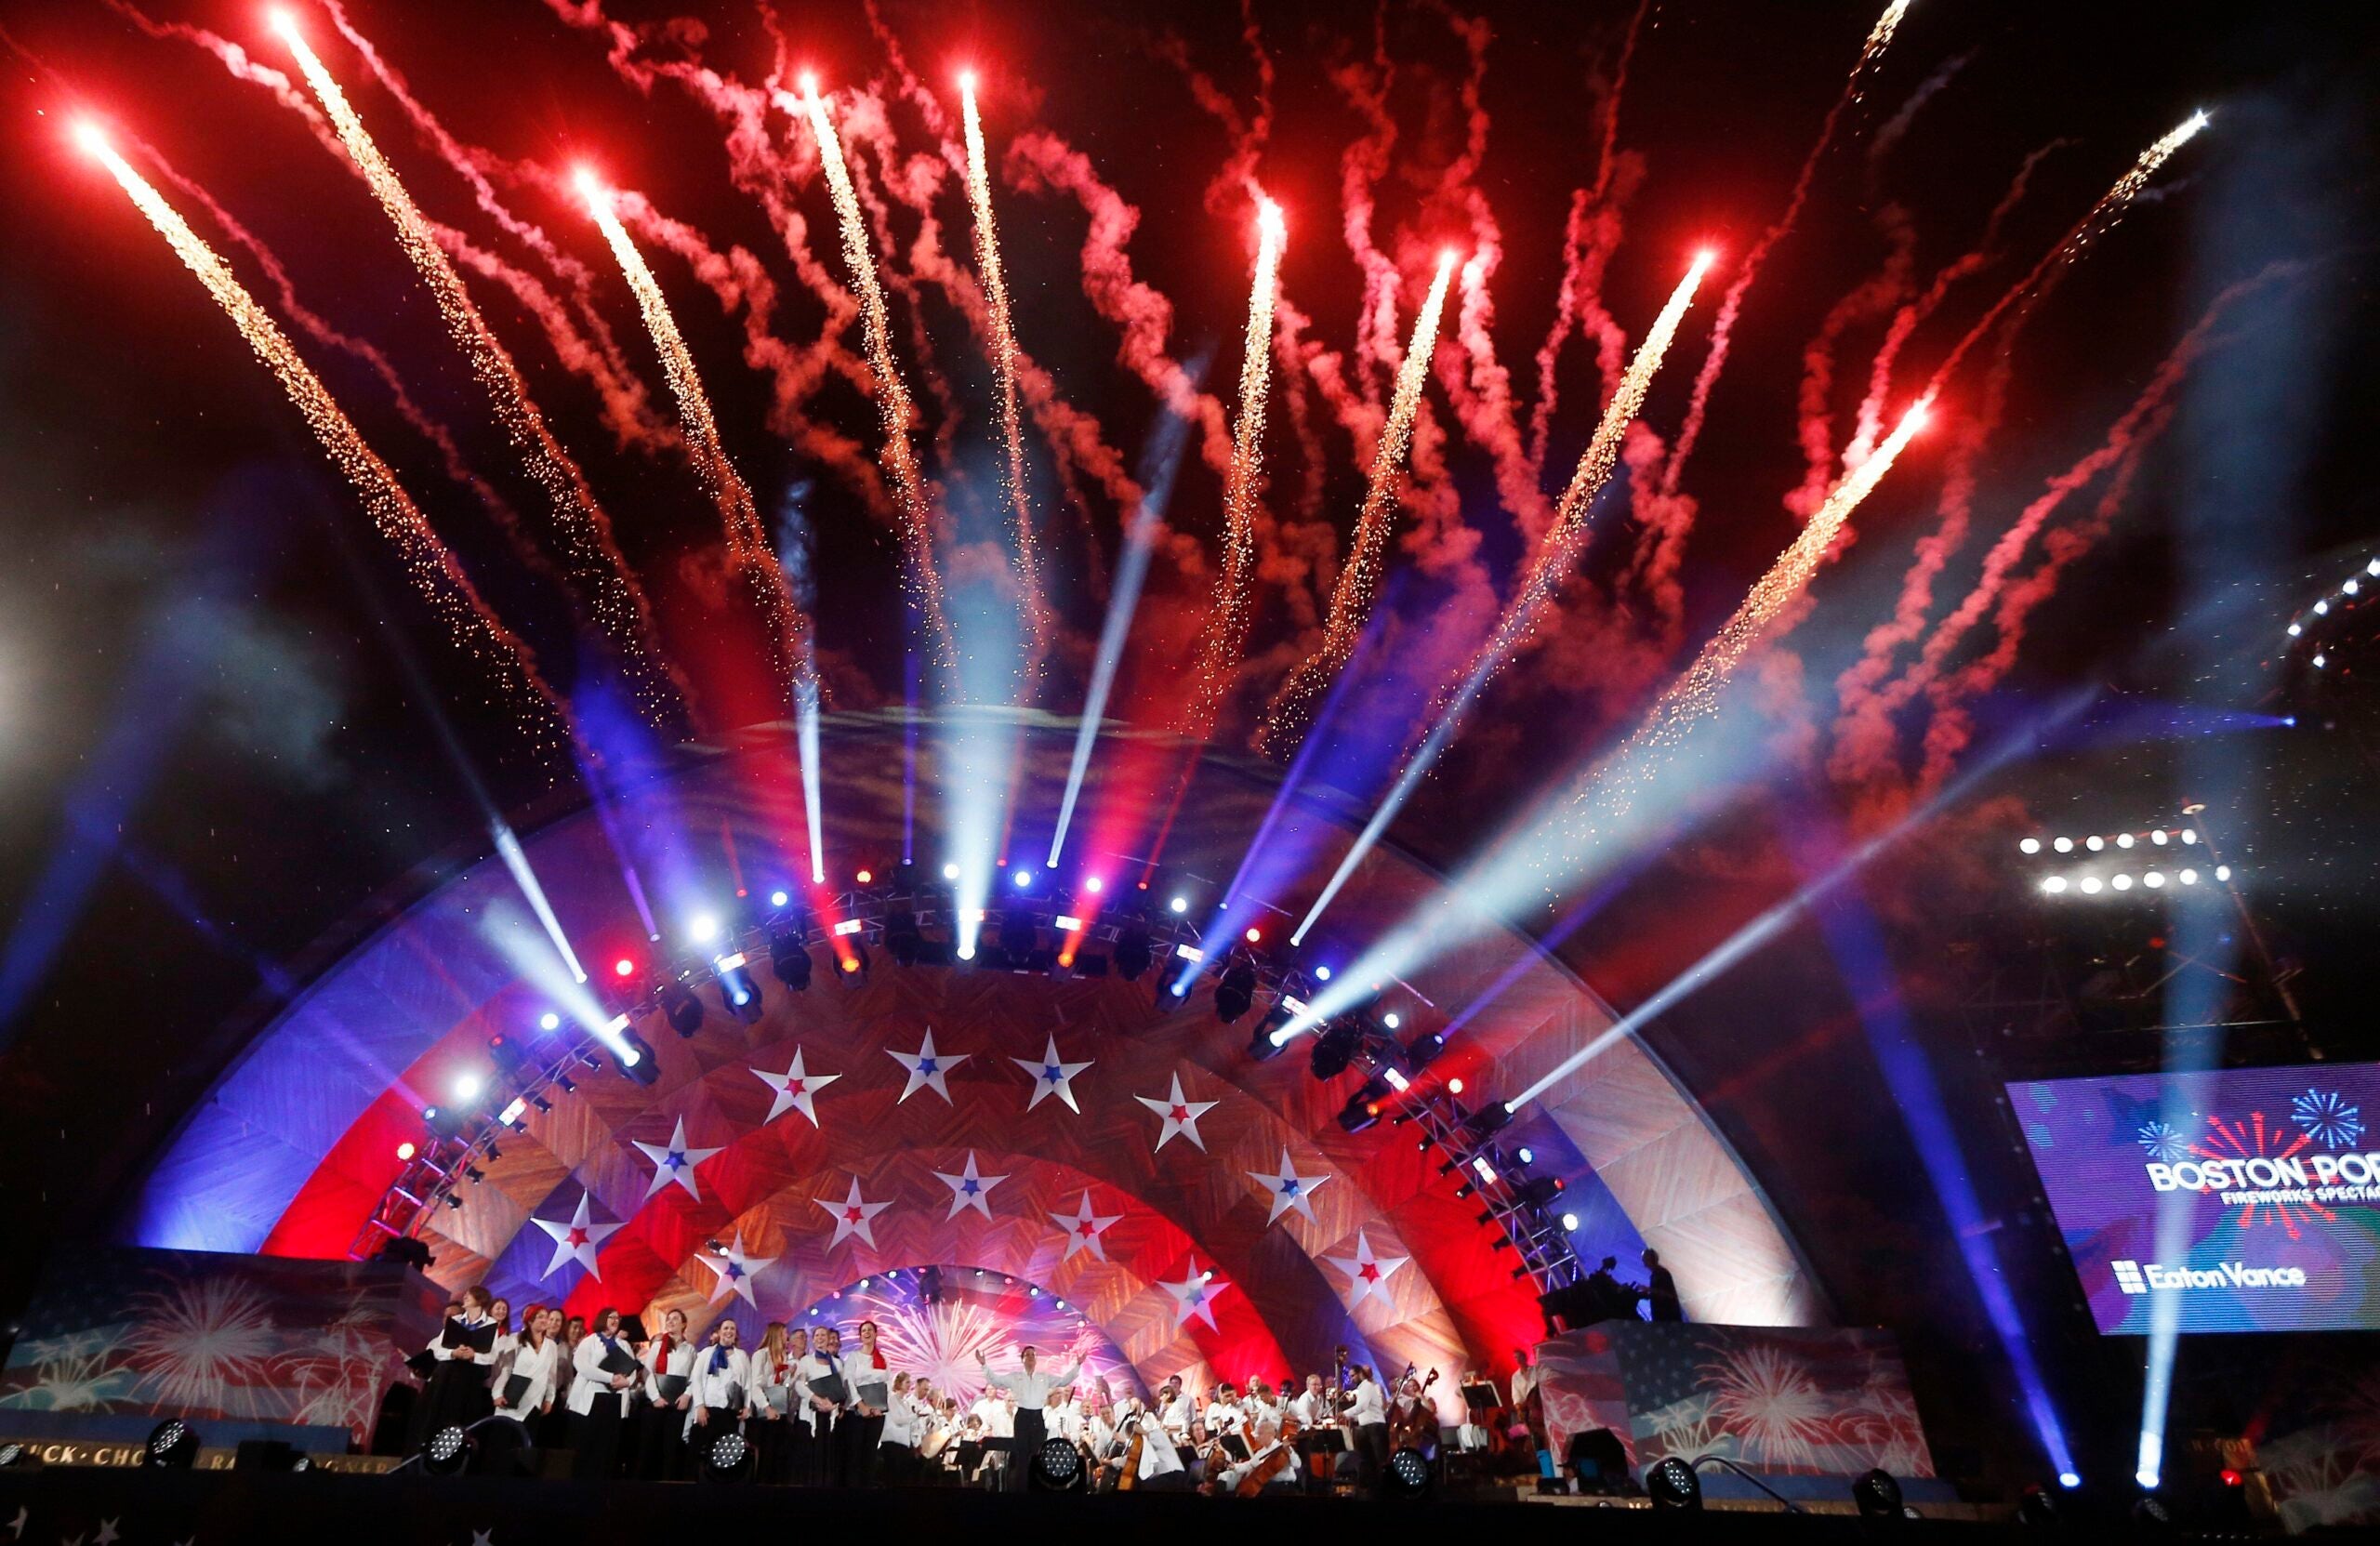 The 2022 Boston Pops Fireworks Spectacular will be held on July 4 at 8 p.m.